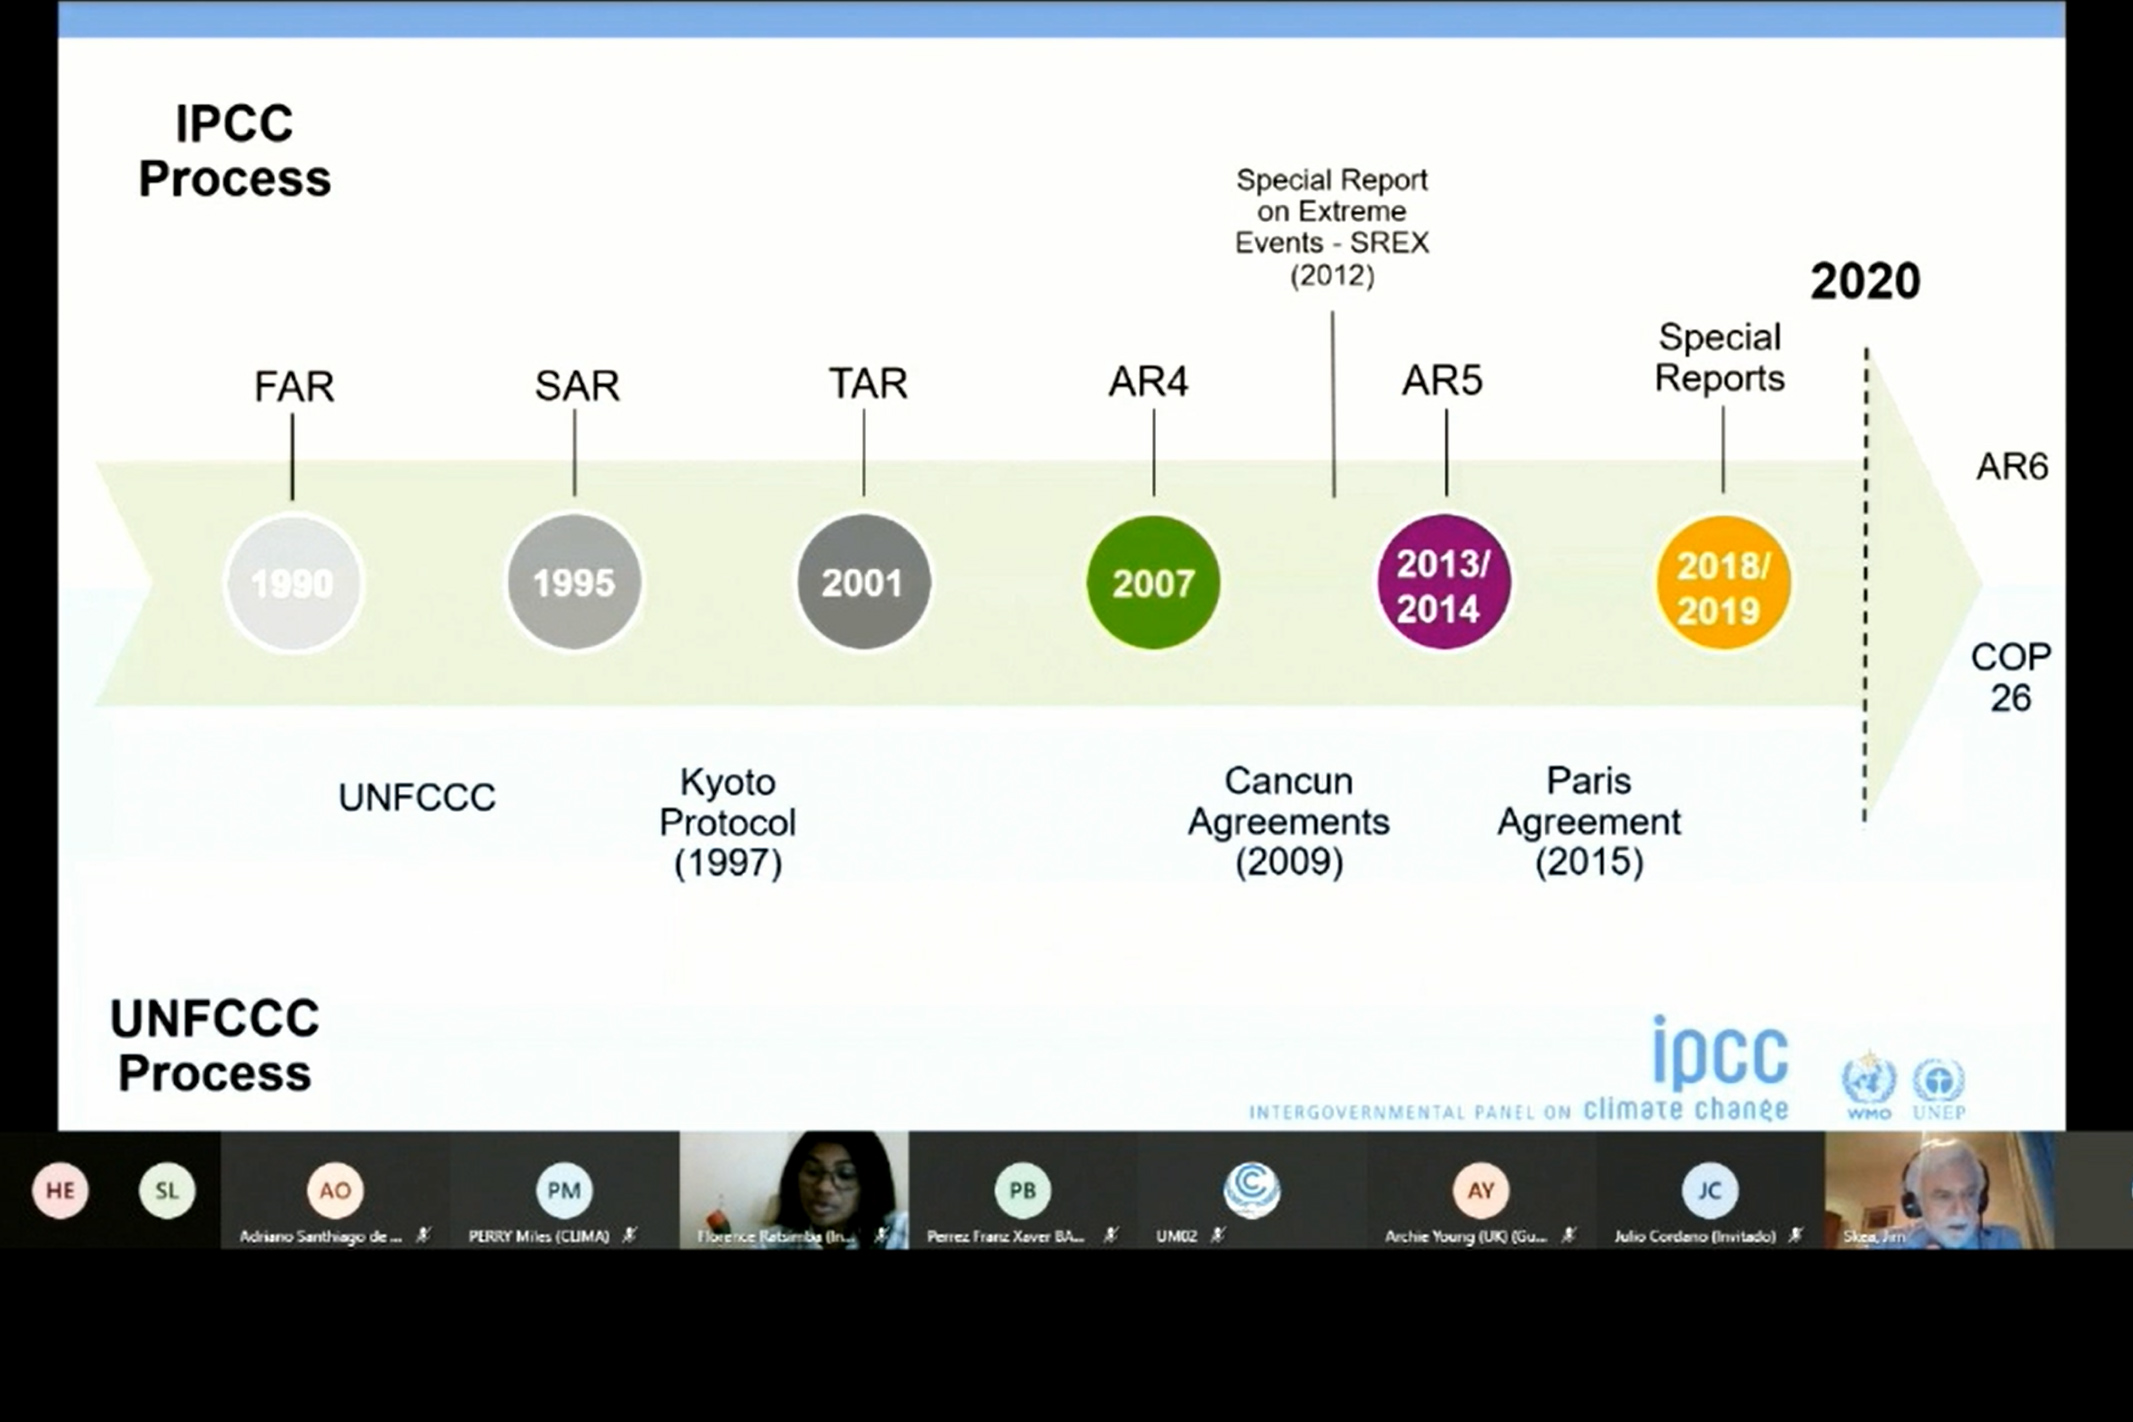 A slide from the presentation of Jim Skea, Co-Chair, Working Group III, IPCC